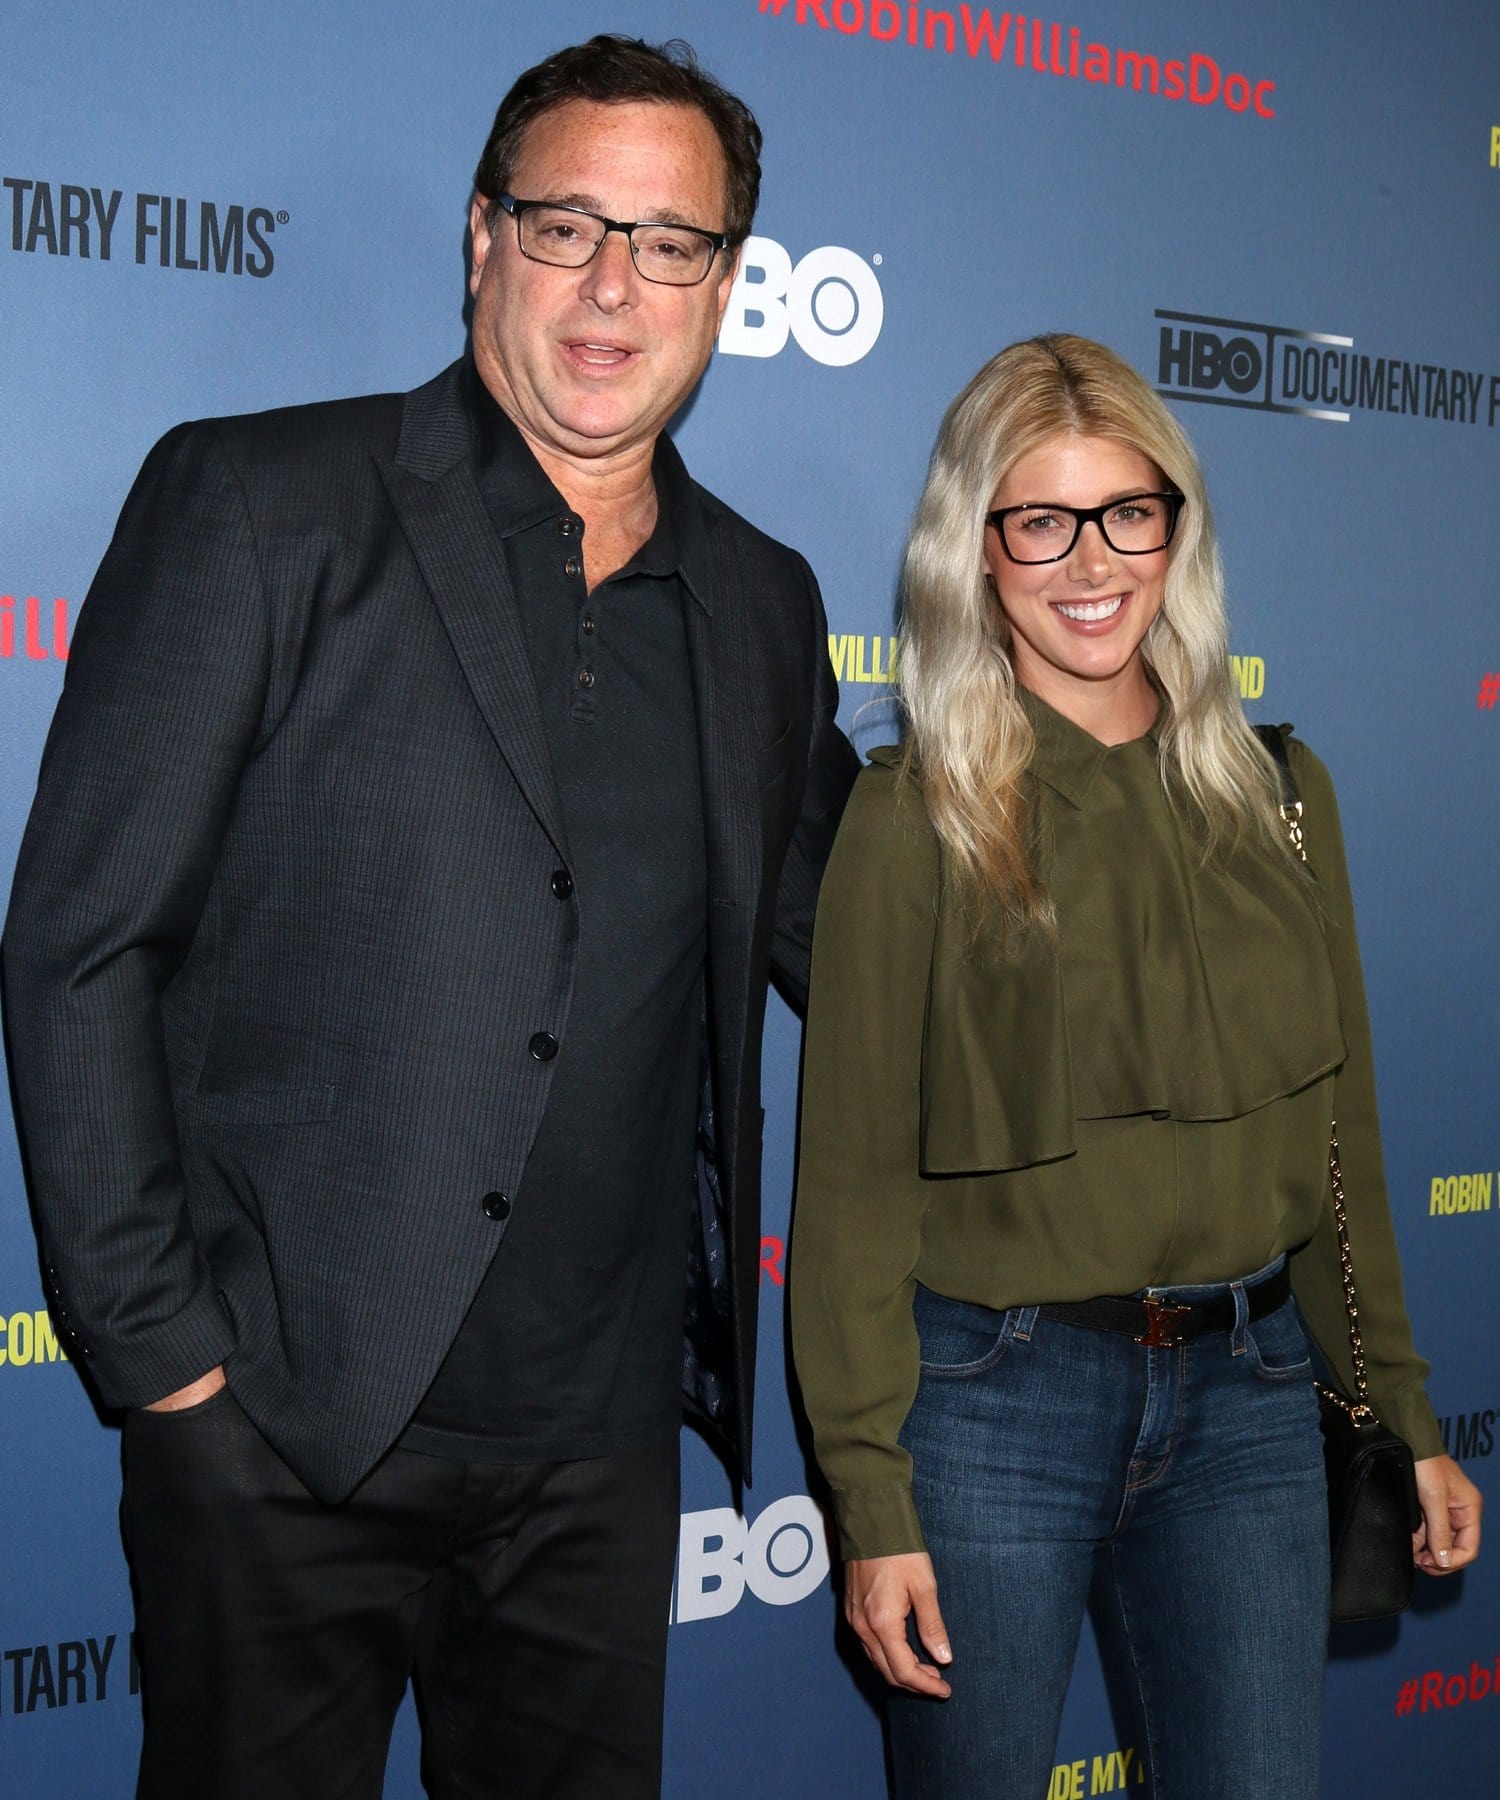 Bob Saget was 23 years older than his wife, Kelly Rizzo, whom he met when she was 36 and was 59